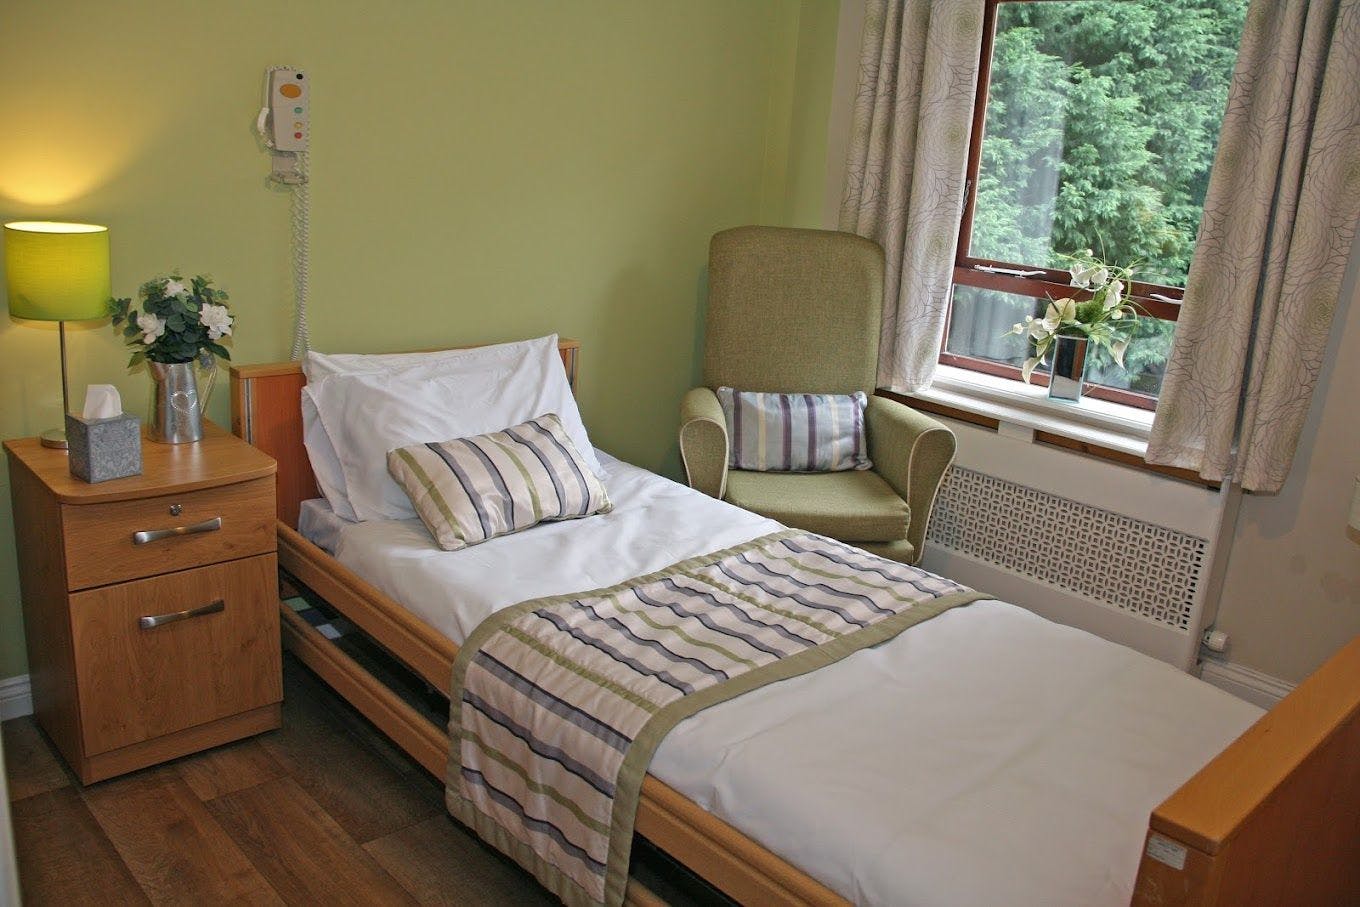 Country Court - Abbey Grange care home 5